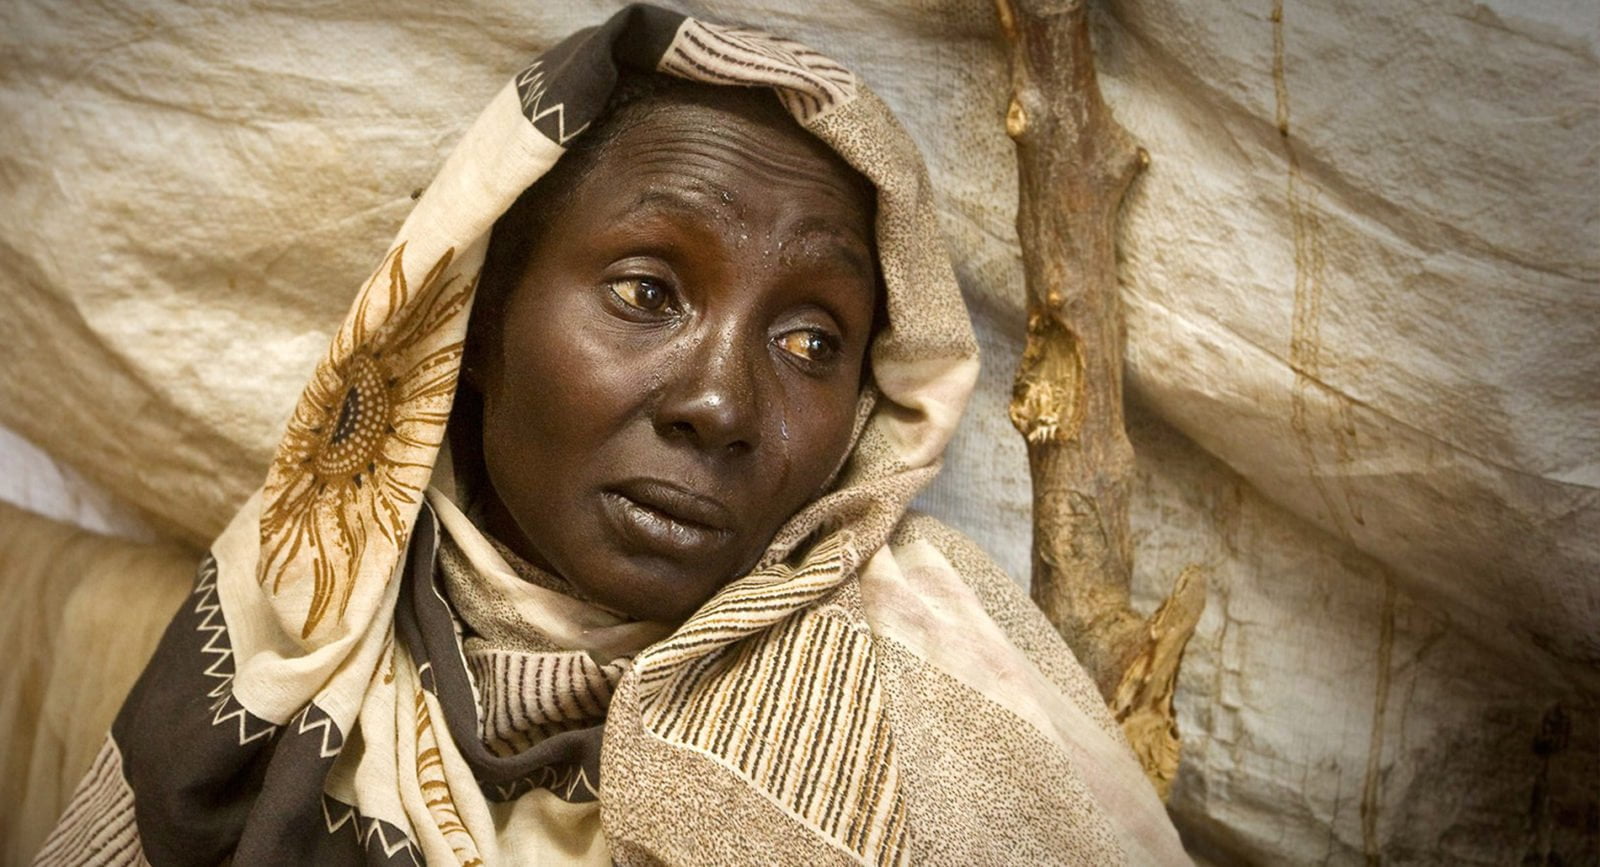 A woman from South Kordofan Sudan in a displaced camp, crying.